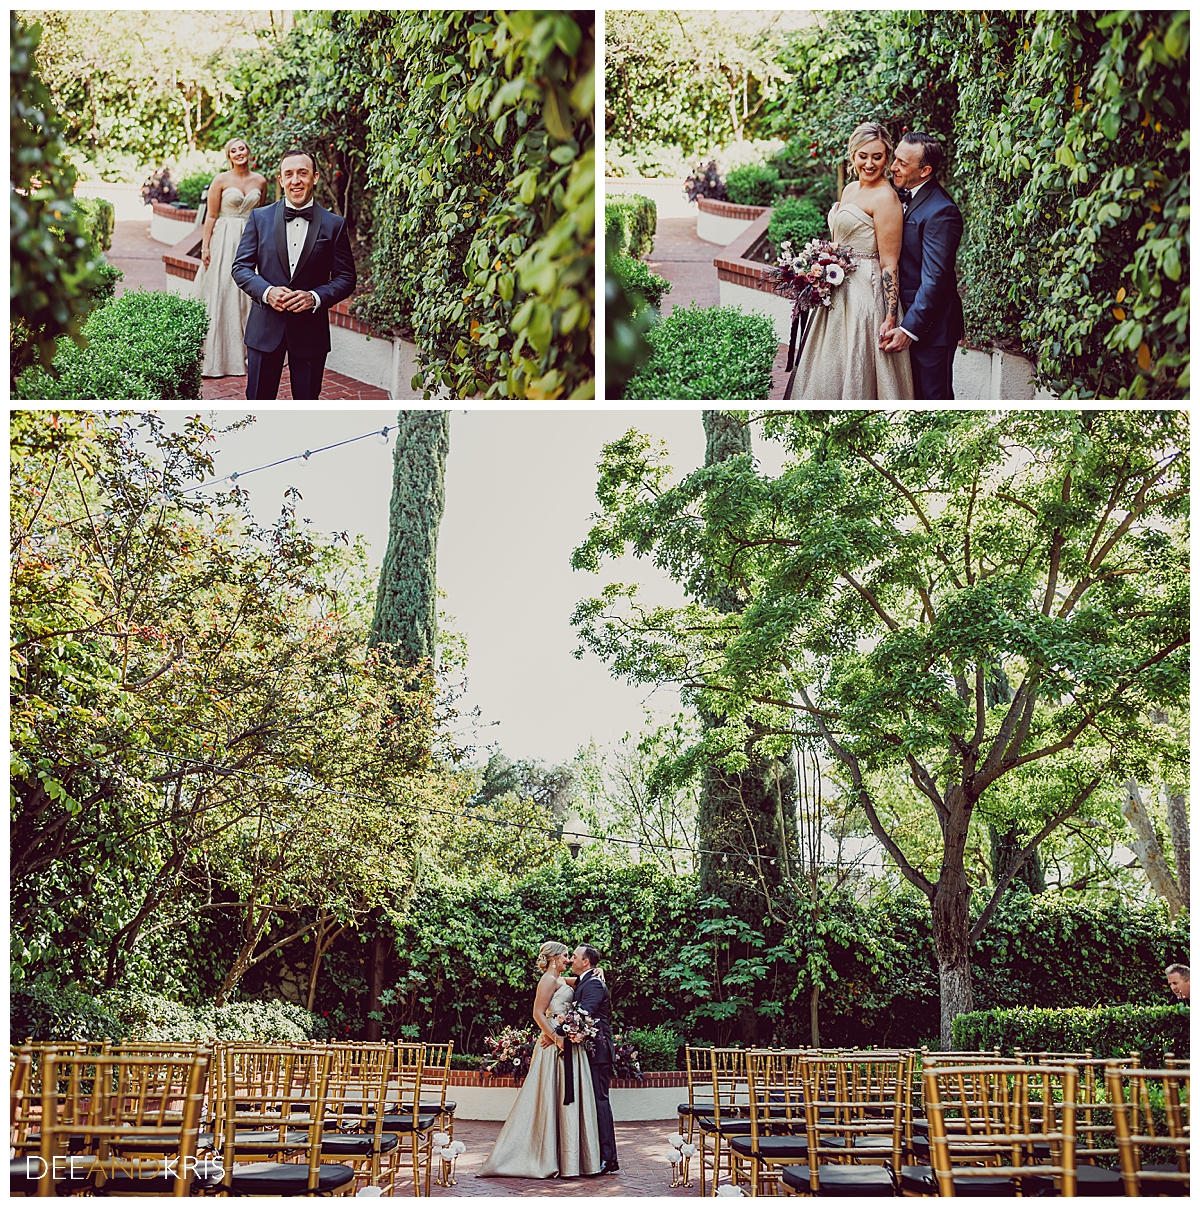 Three images of couple's first look: Top left image of bride walking up behind groom. Top Right image of bride and groom in reverse hug. Bottom image of bride and groom in front of empty guest